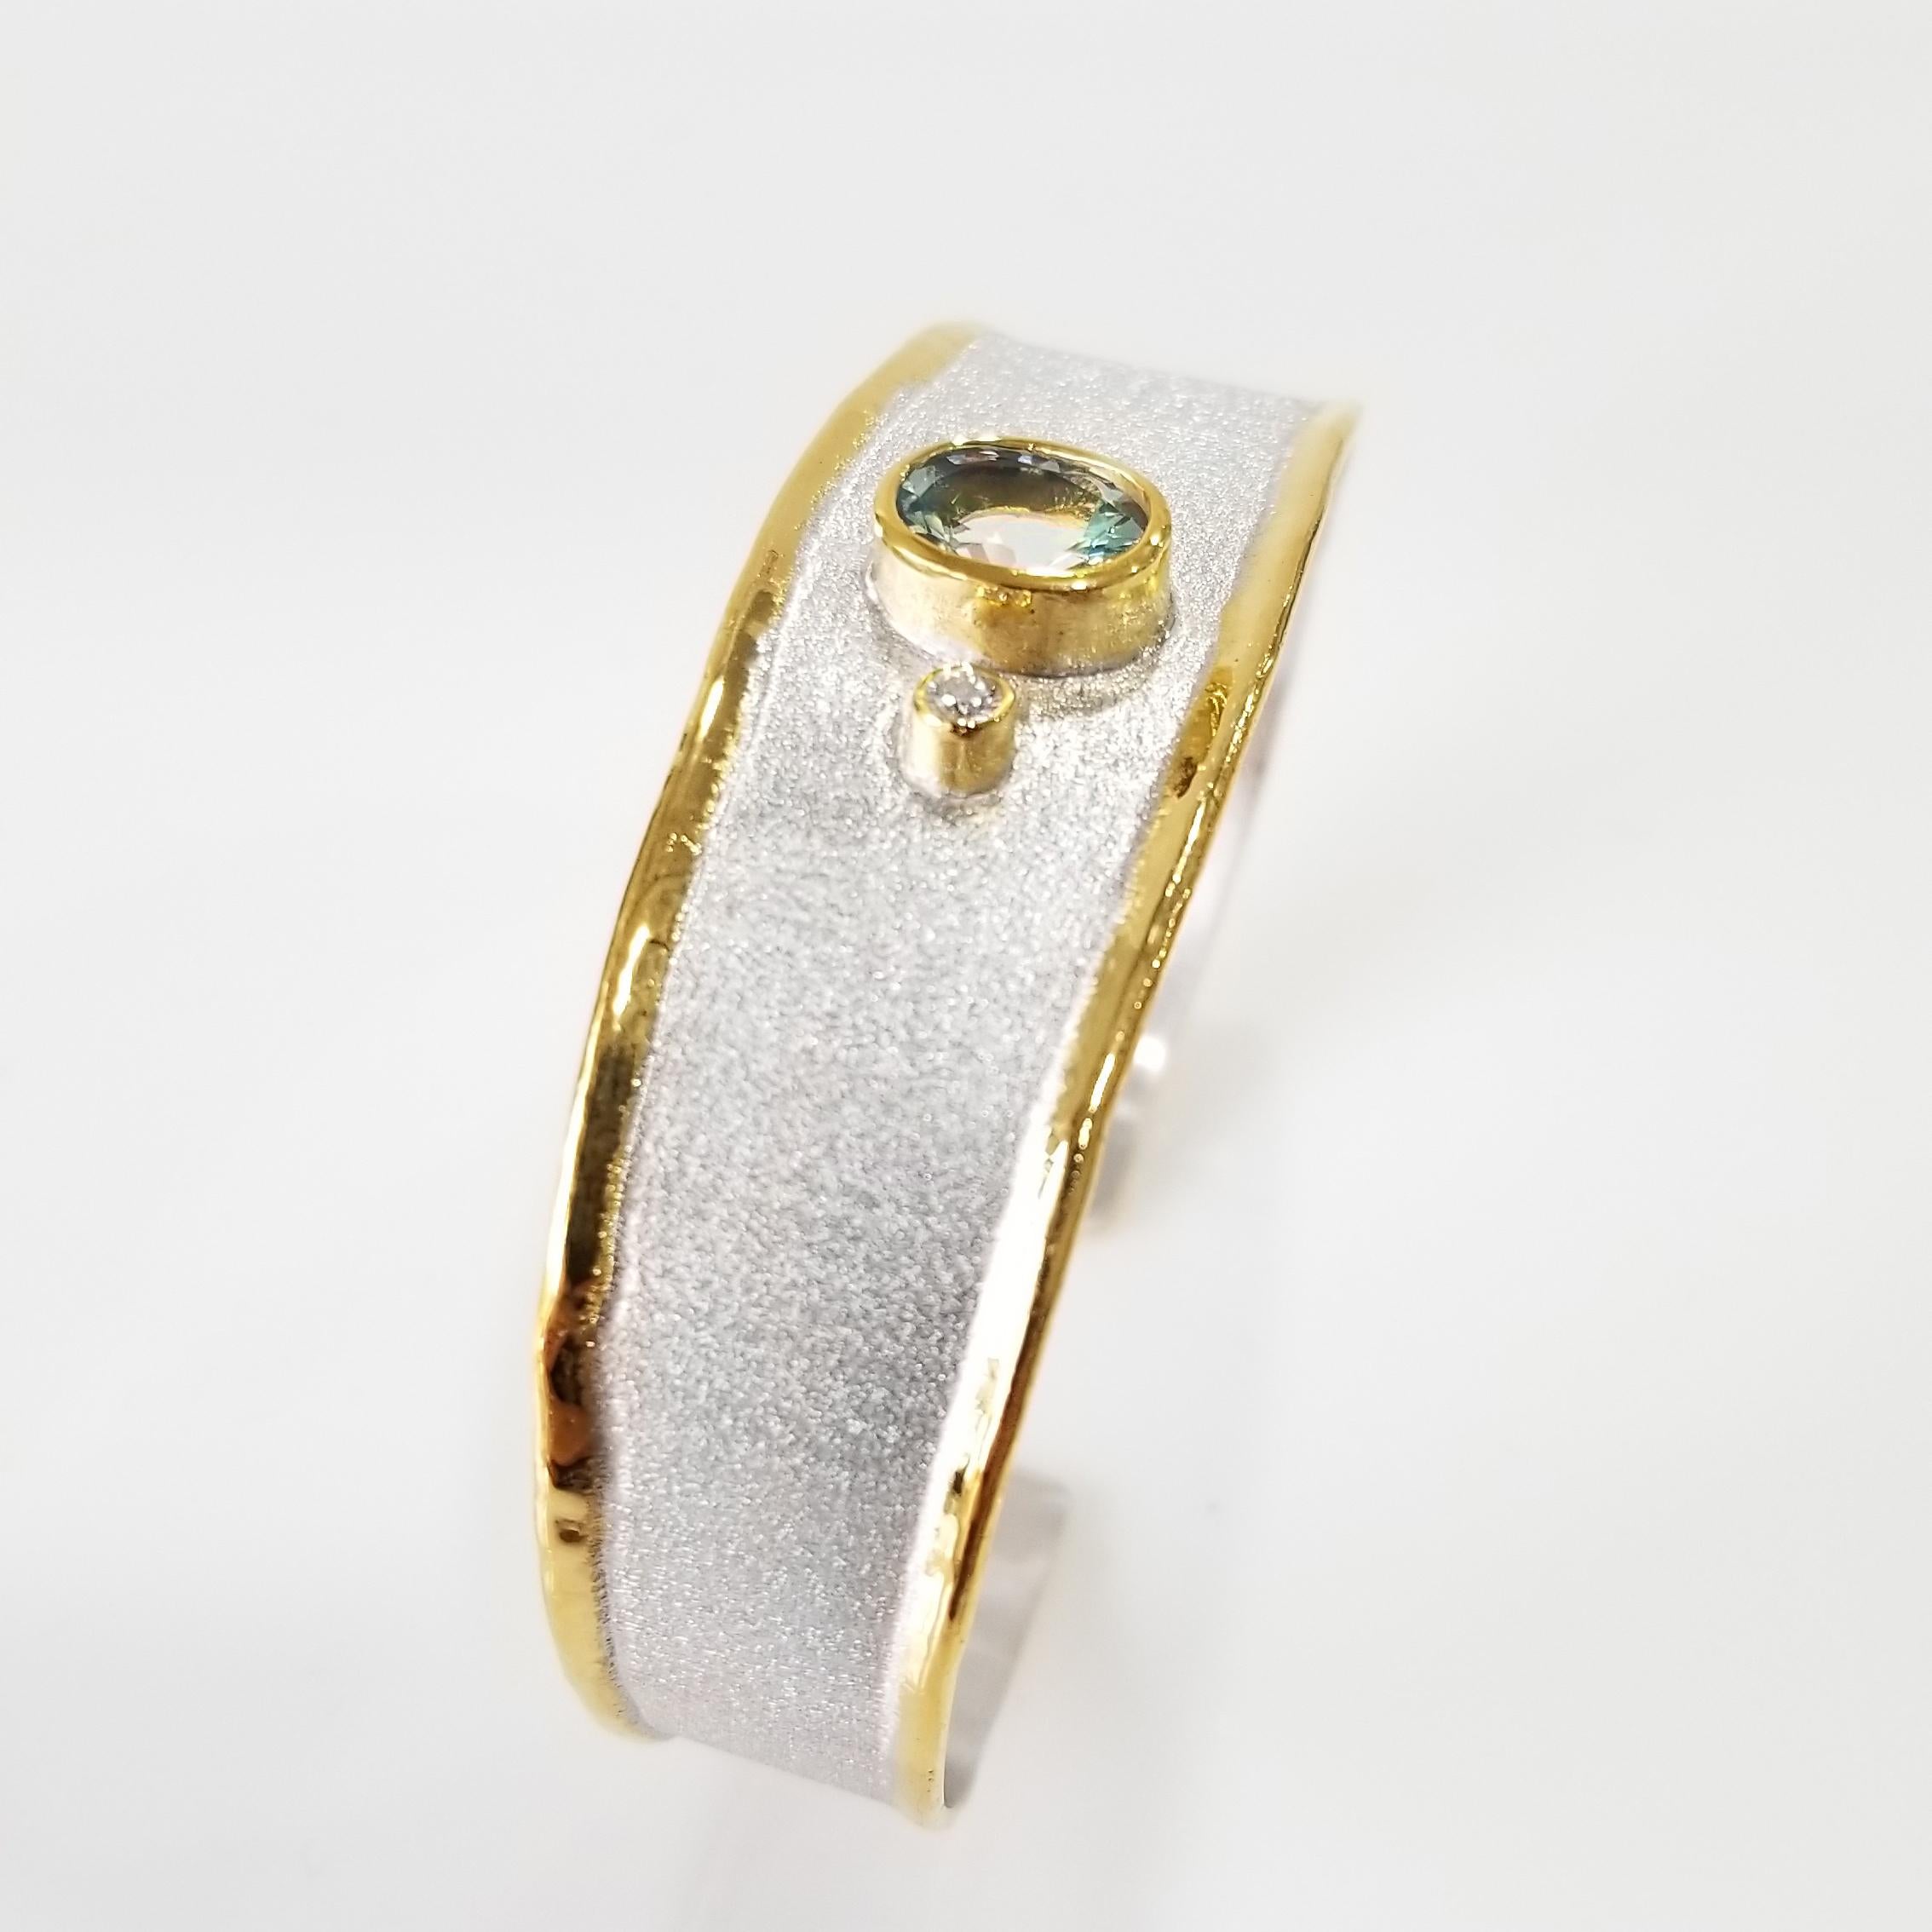 Yianni Creations bangle bracelet from Midas Collection all handcrafted from fine silver 950 purity and plated with palladium to resist the elements. This stunning artisan bracelet features 1.10 Carat oval shape aquamarine accompanied by 0.03 Carat